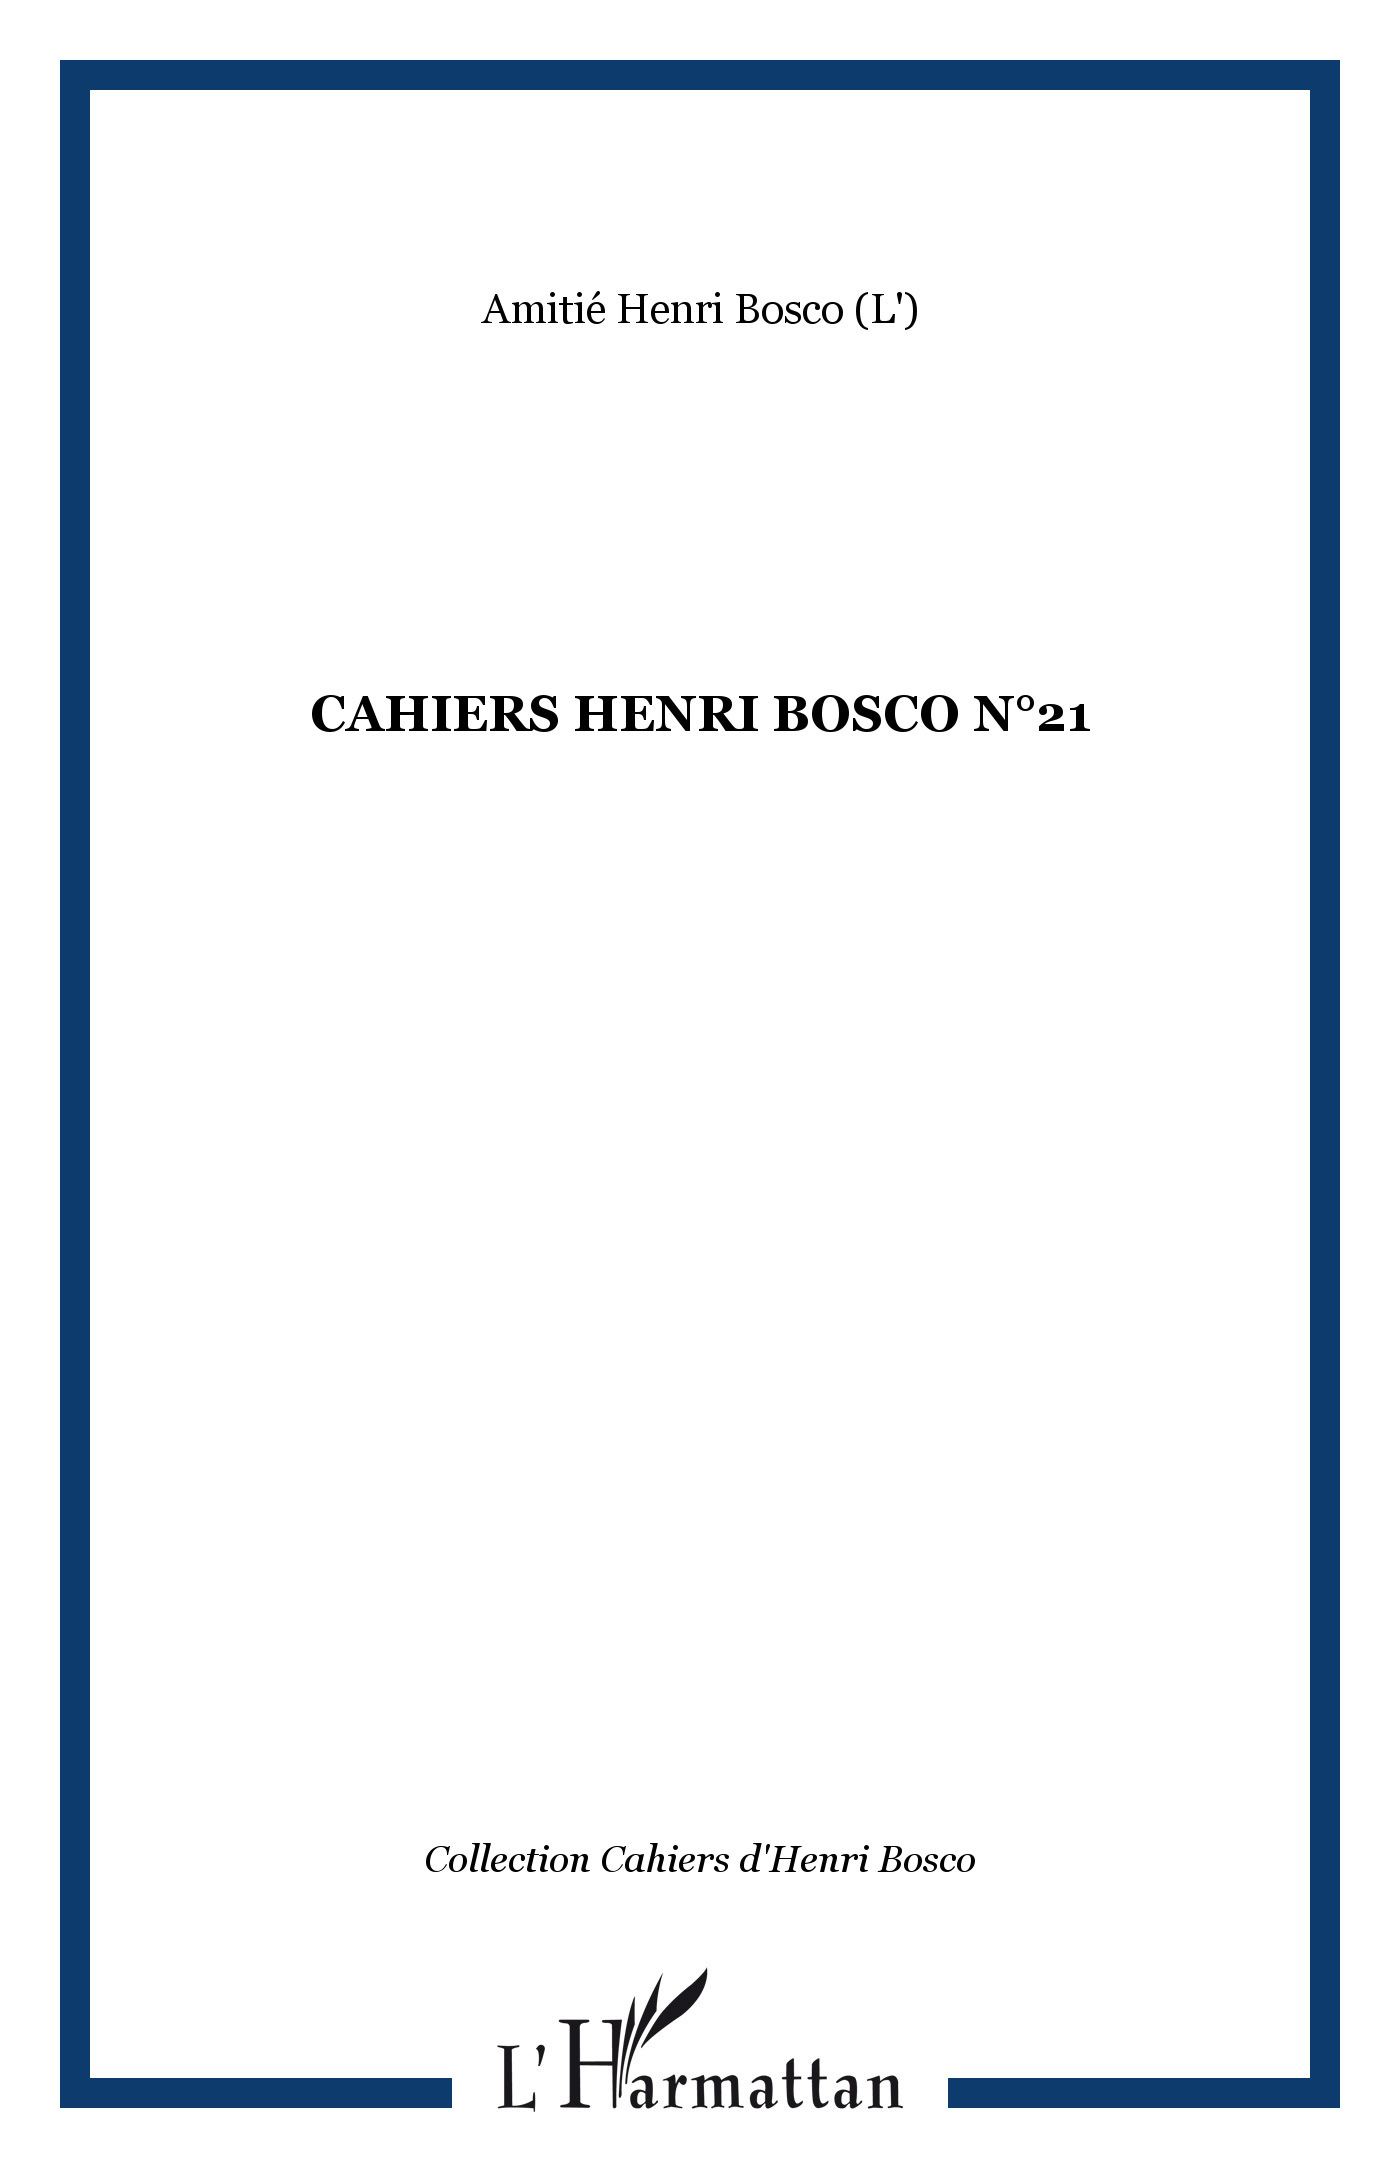 CAHIERS HENRI BOSCO N°21 (9782296072930-front-cover)